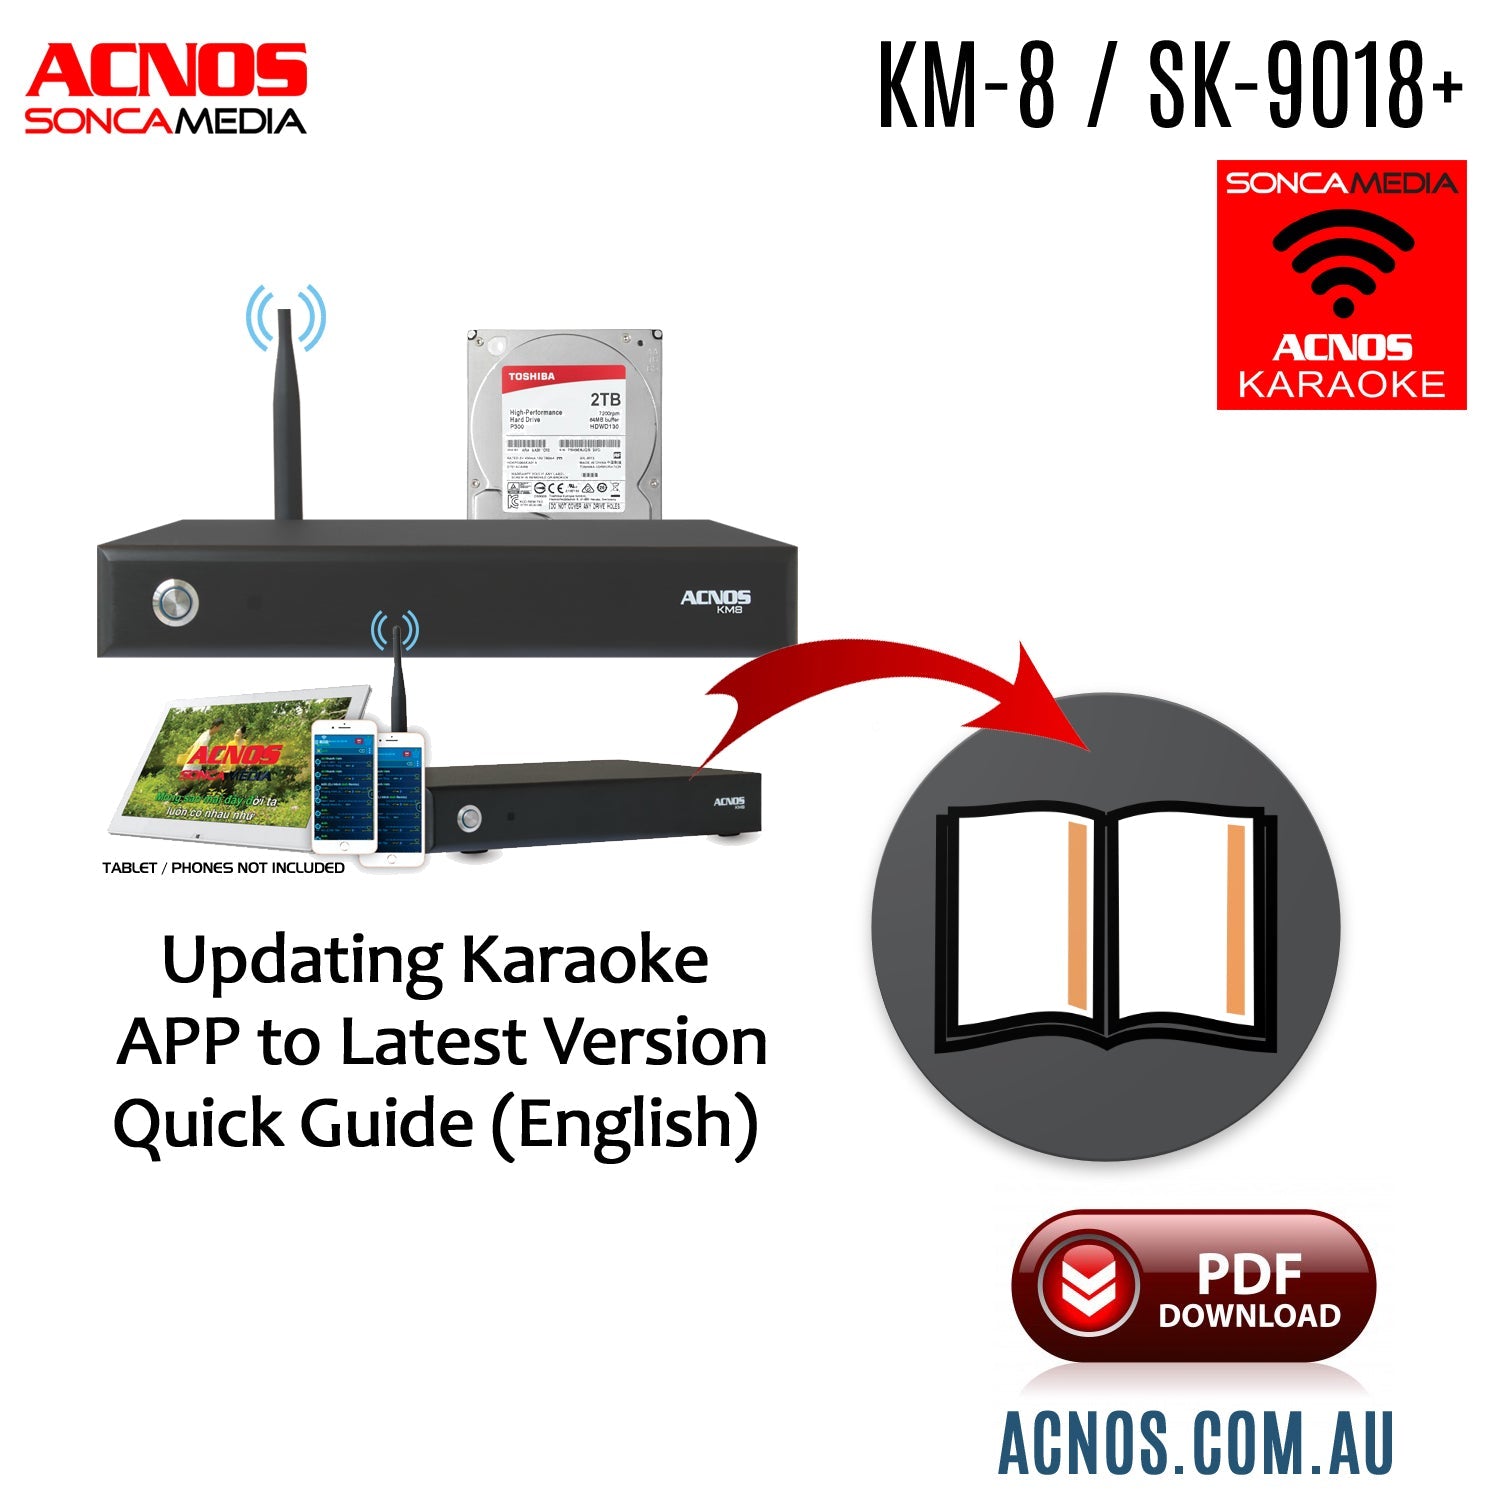 How To Connect Guide - ACNOS KM-8 / SK-9018+ Karaoke HDD APP Update (English) - Karaoke Home Entertainment